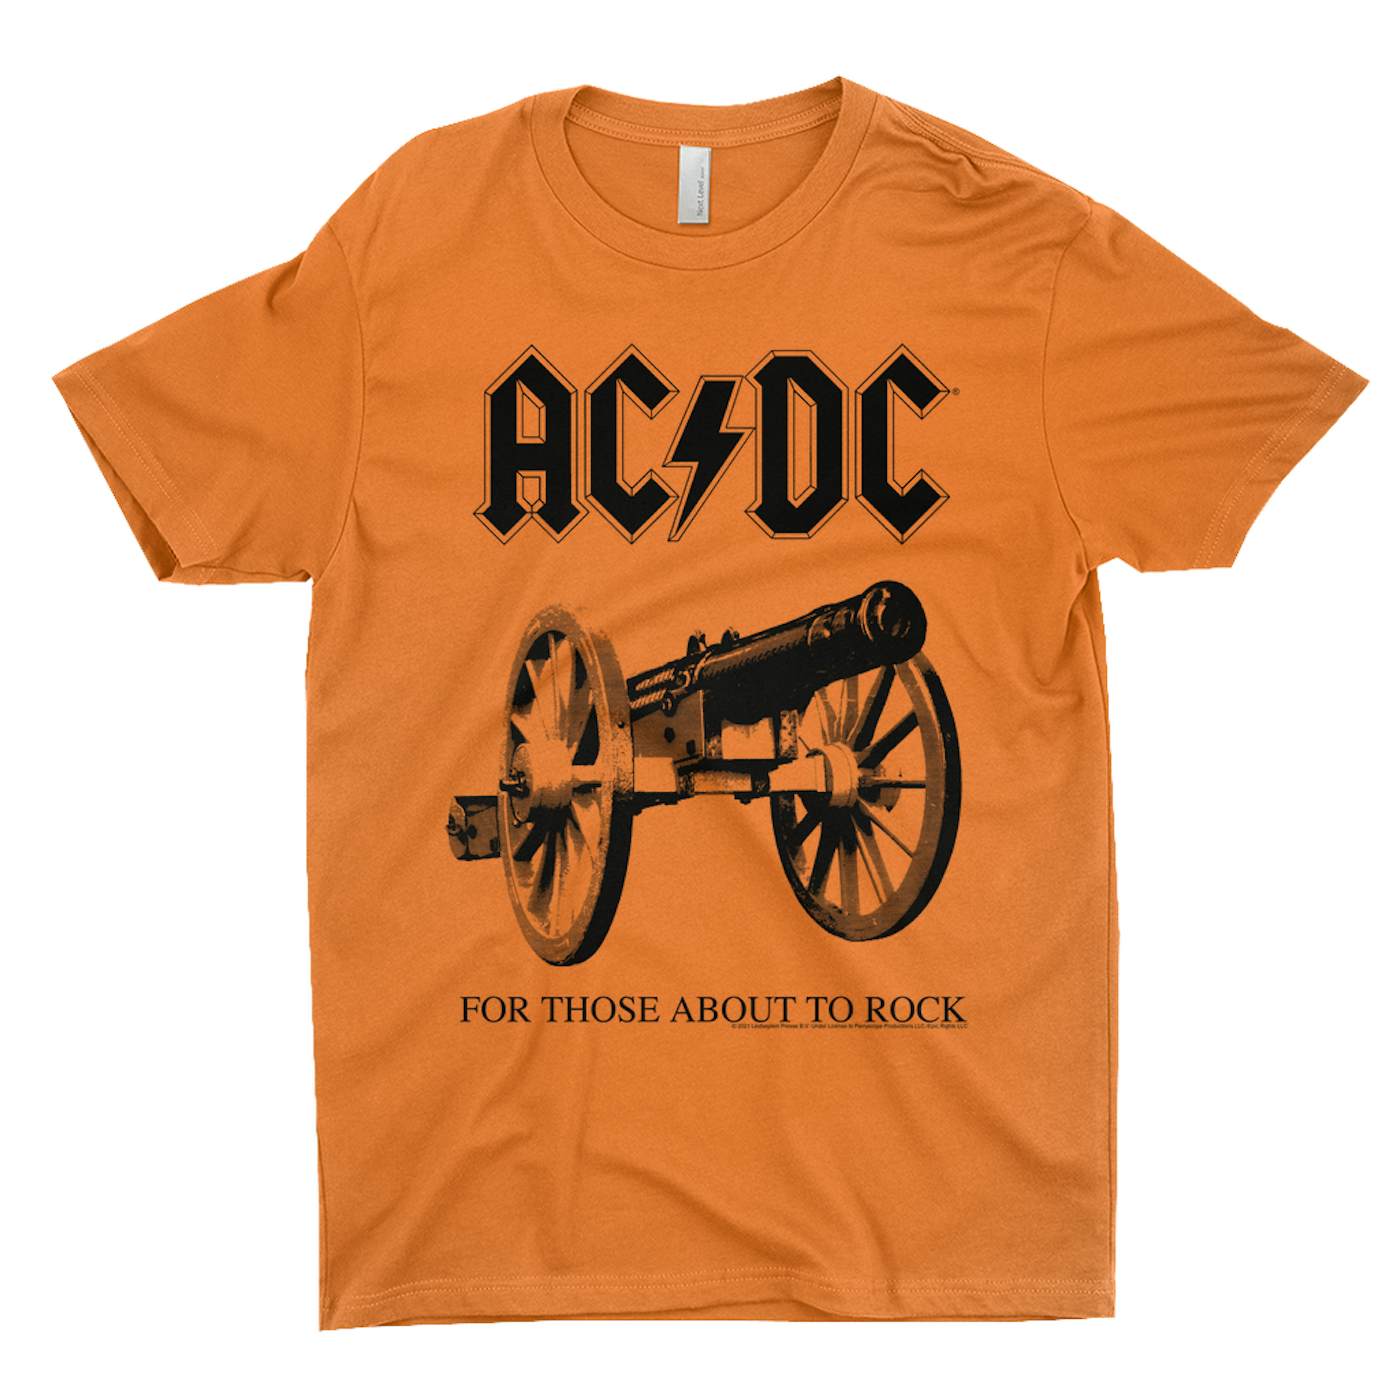 AC/DC T-Shirt | For To About Shirt Image Rock Those Black Cannon